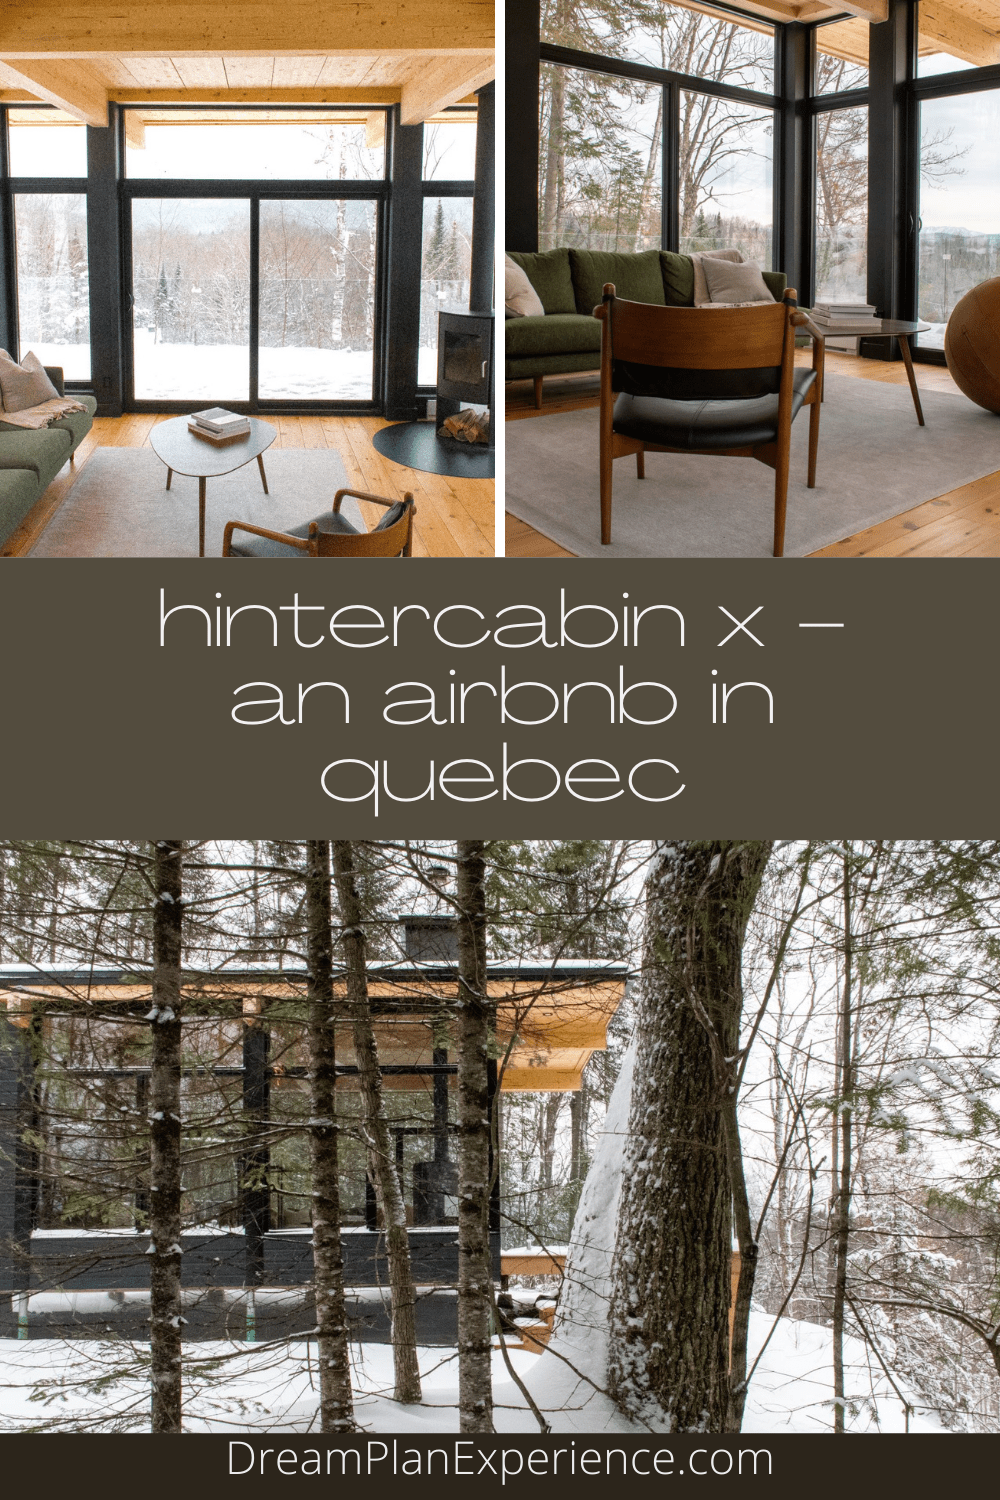 Escape to hintercabin x, a modern prefab Scandinavian-style cabin surrounded by nature. This Airbnb sits atop a hill in the quiet community of La Conception of the Laurentians in Quebec, Canada.